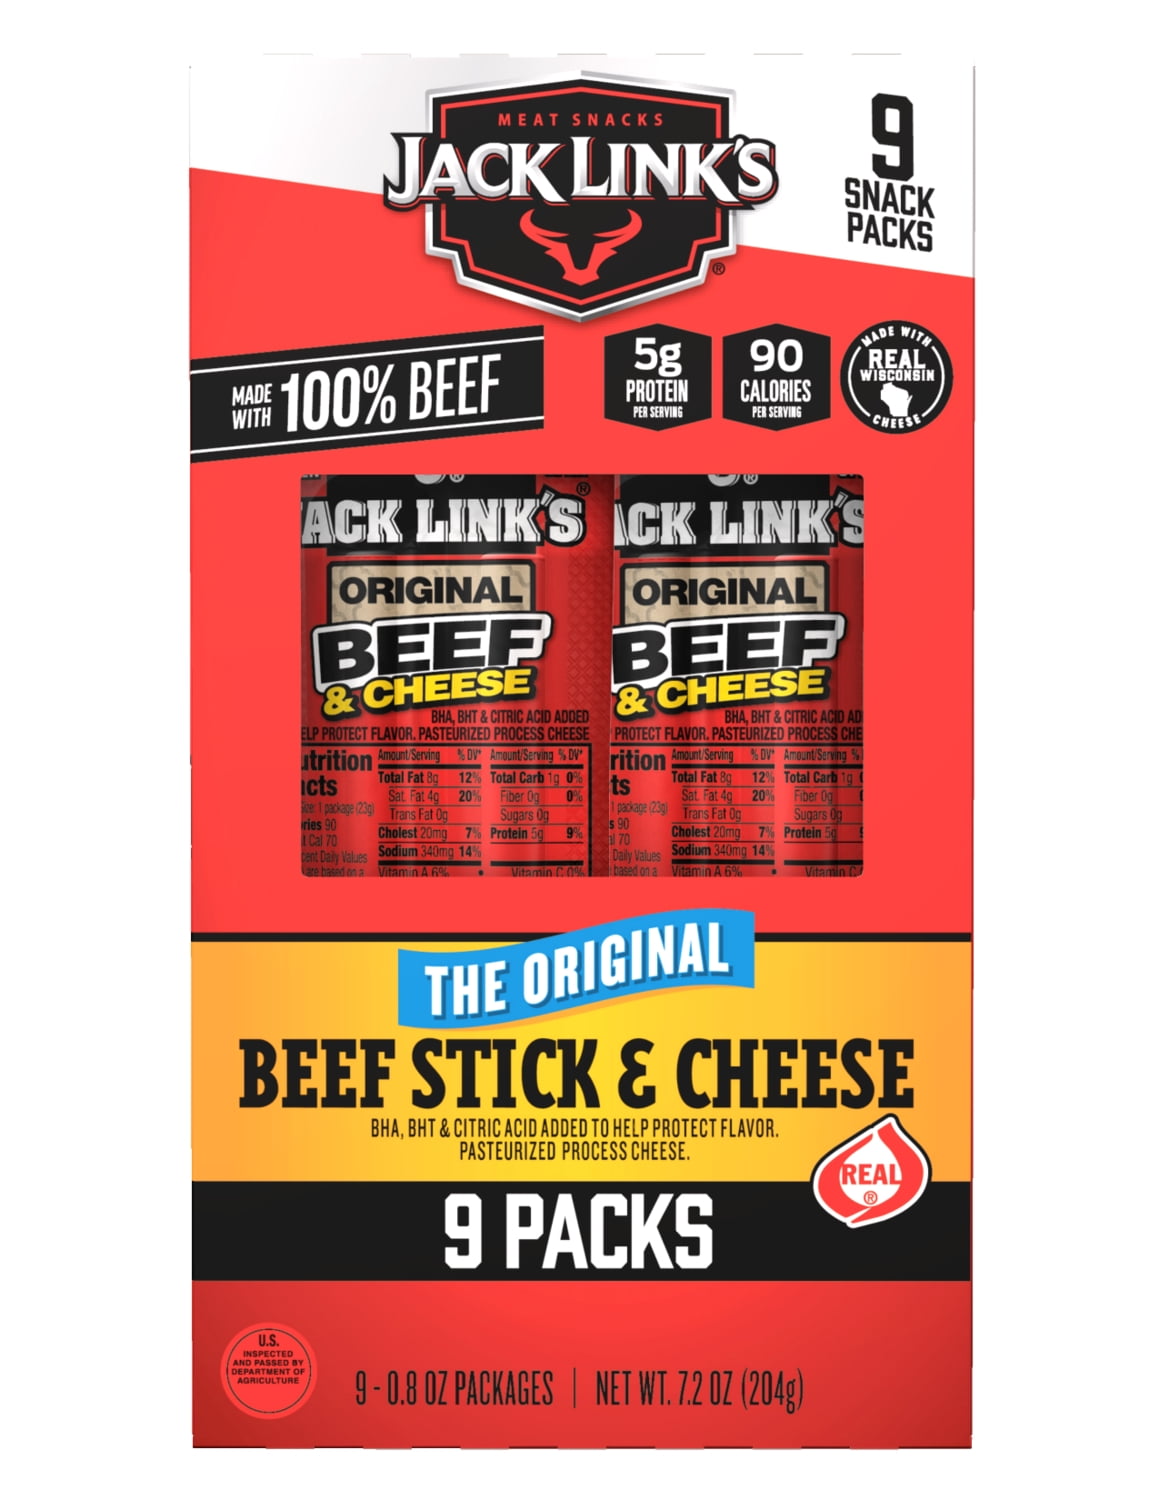 Jack Link's Original Beef Stick & Cheese, 0.8 oz, 9 Count.  Made with 100% Beef and Real Wisconsin Cheese